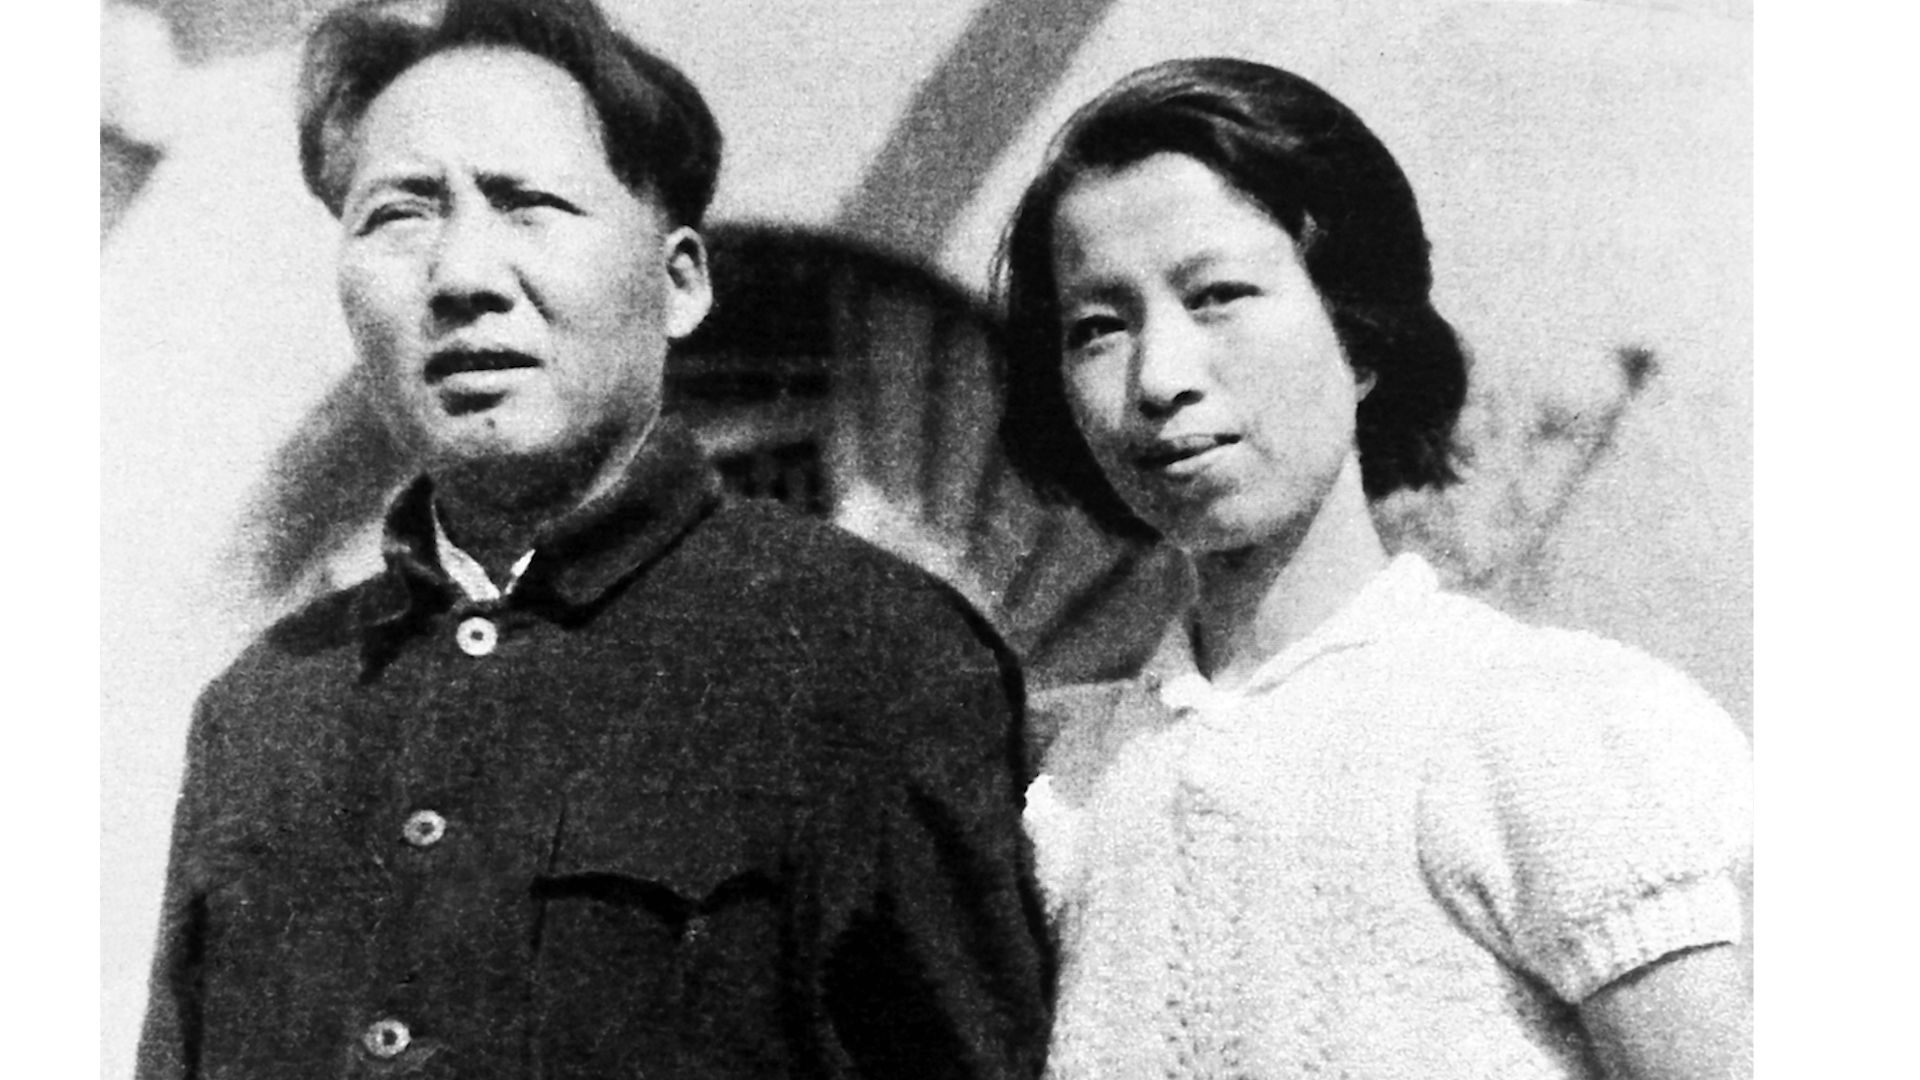 Mao and his wife Jiang Qing, an actor and revolutionary propagandist who features prominently in the series (BBC)